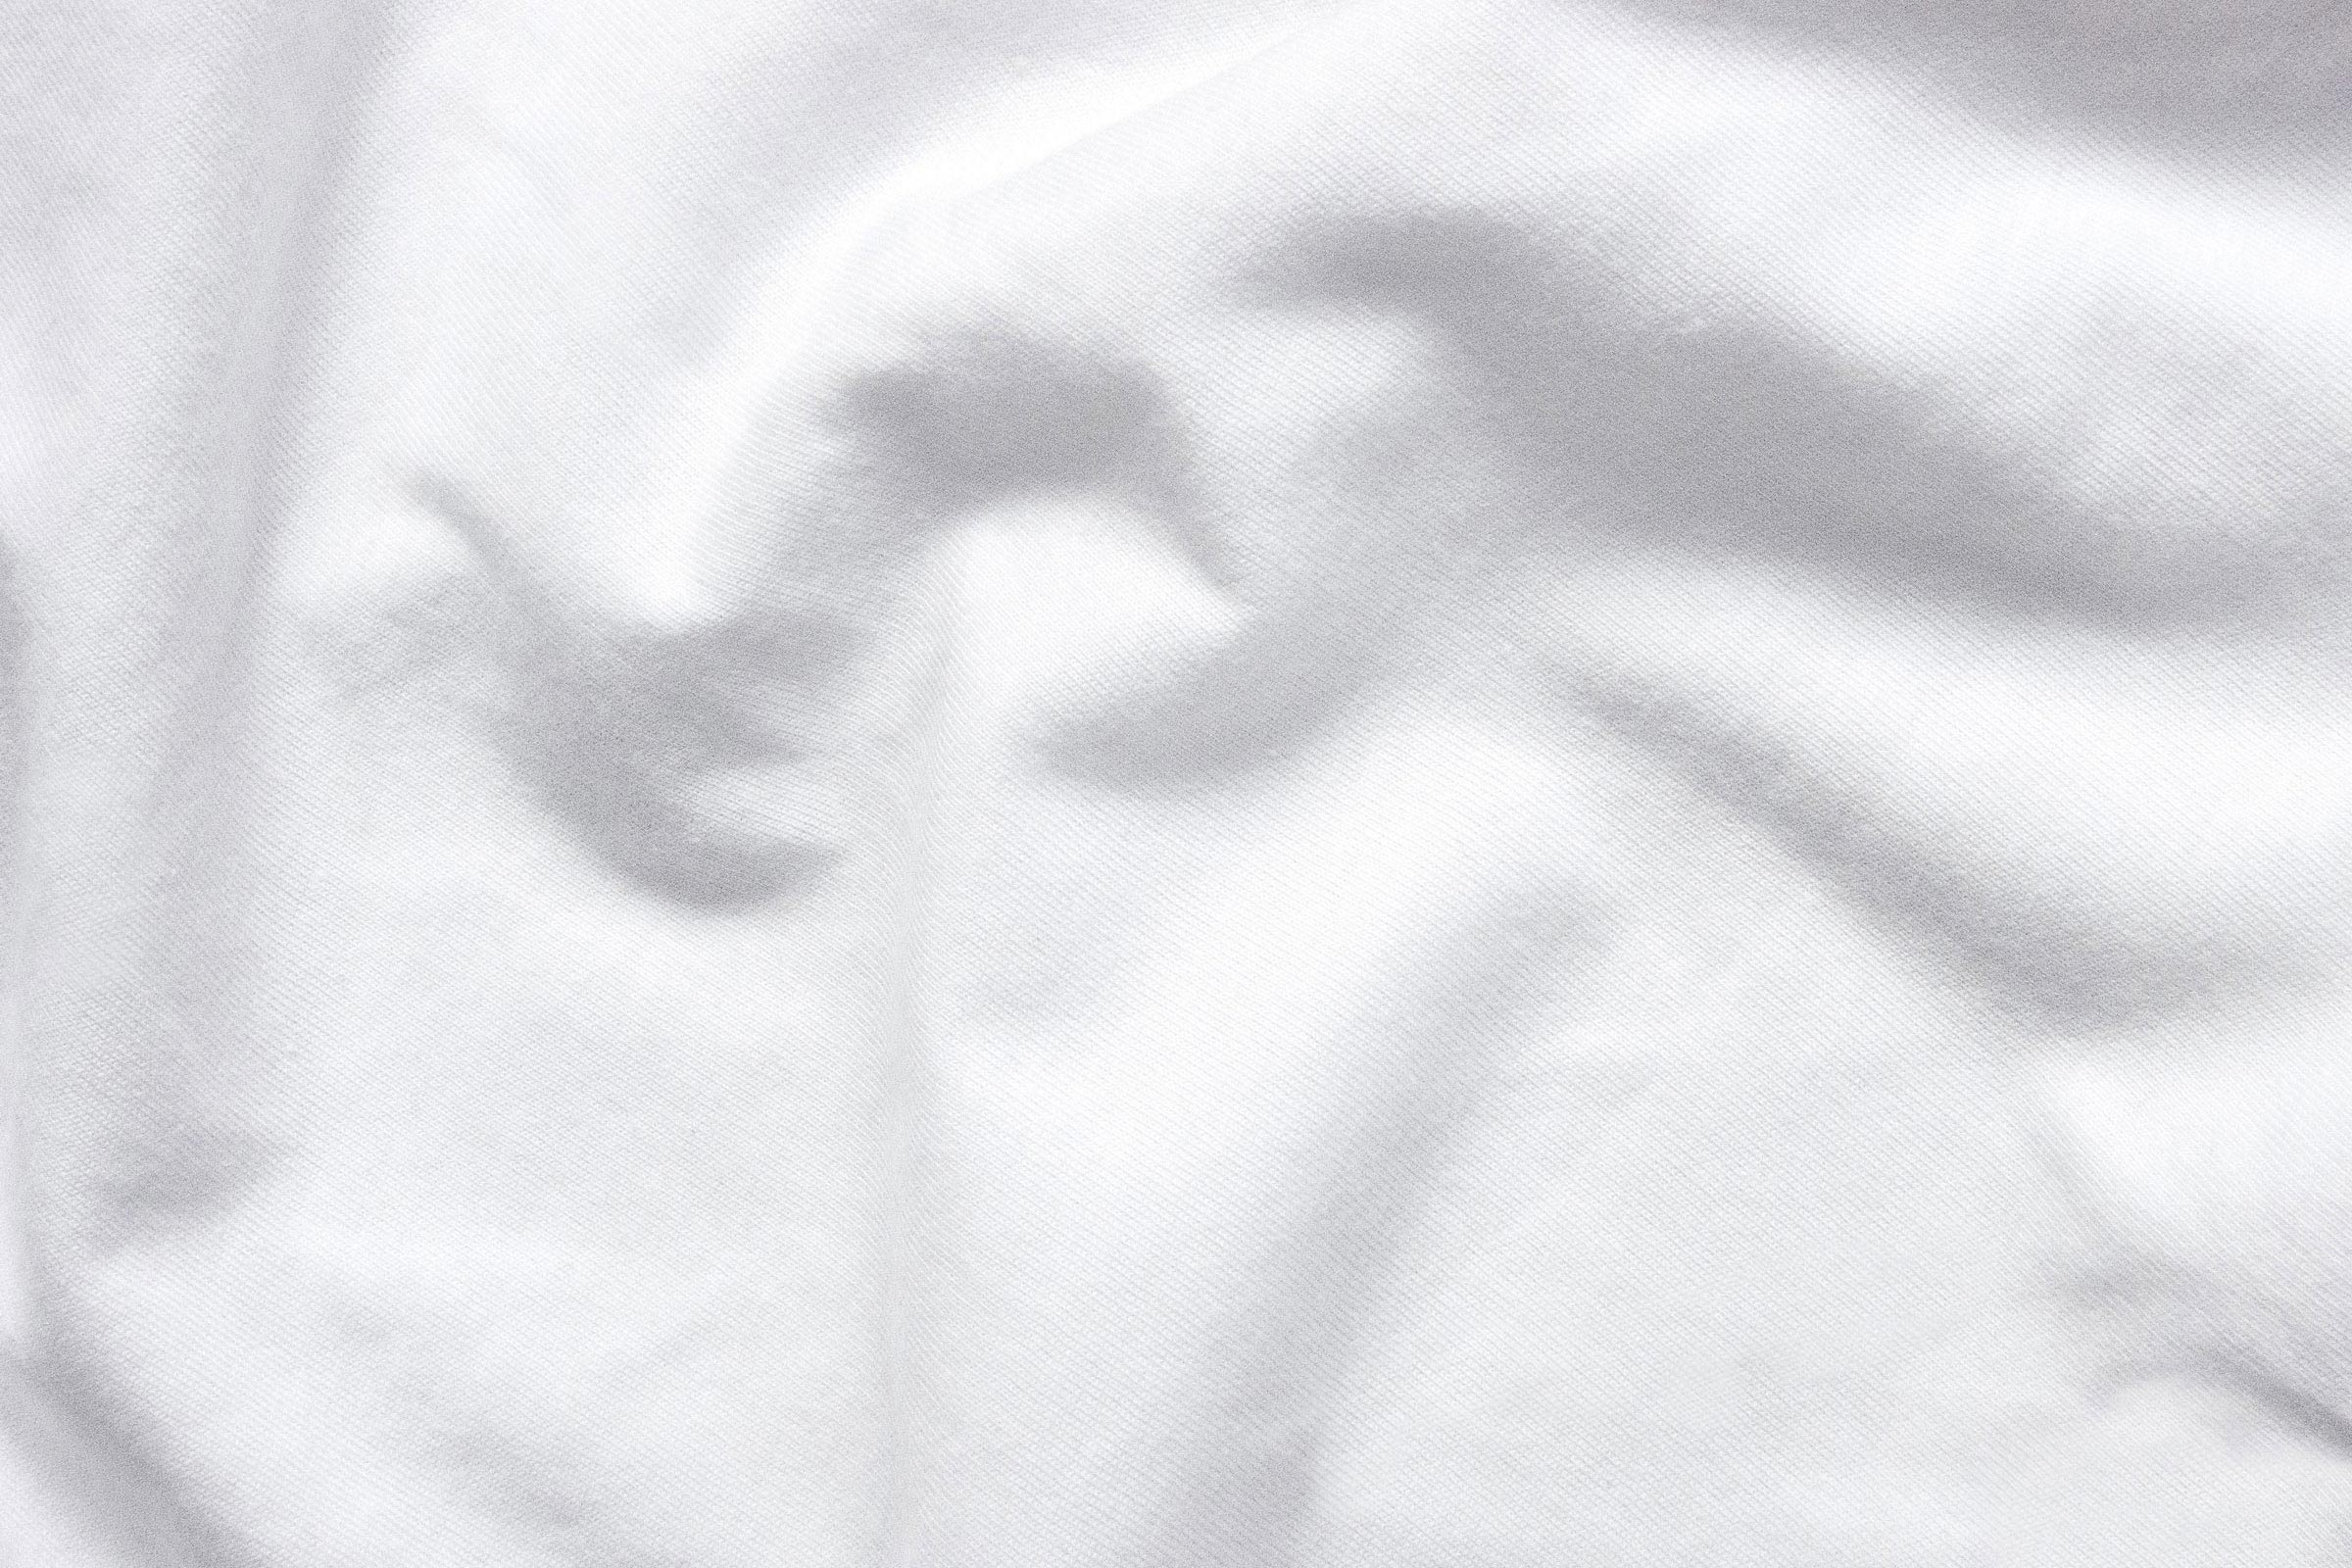 organic-jersey-white-baby-cot-fitted-sheet-close-up-shot-by-sojao.jpg